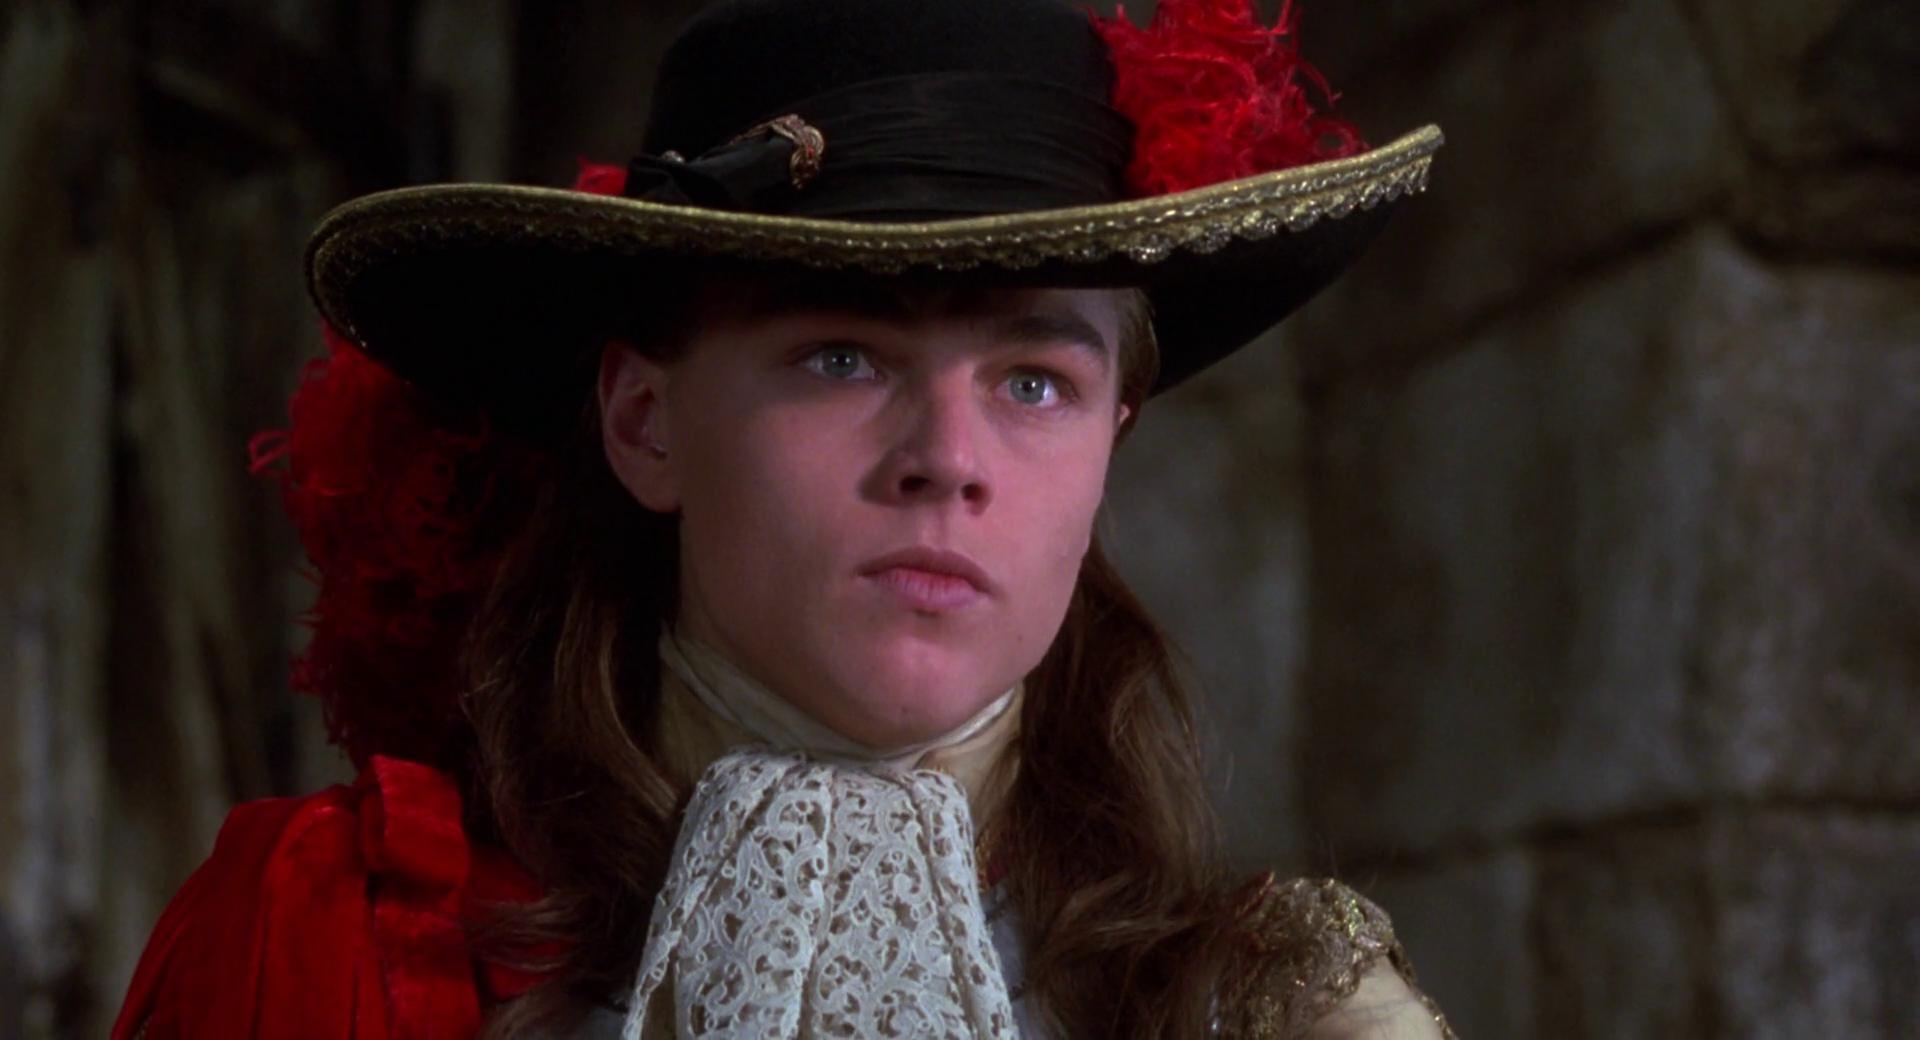 Image gallery for "The Man in the Iron Mask (1998)" - Filmaffinity